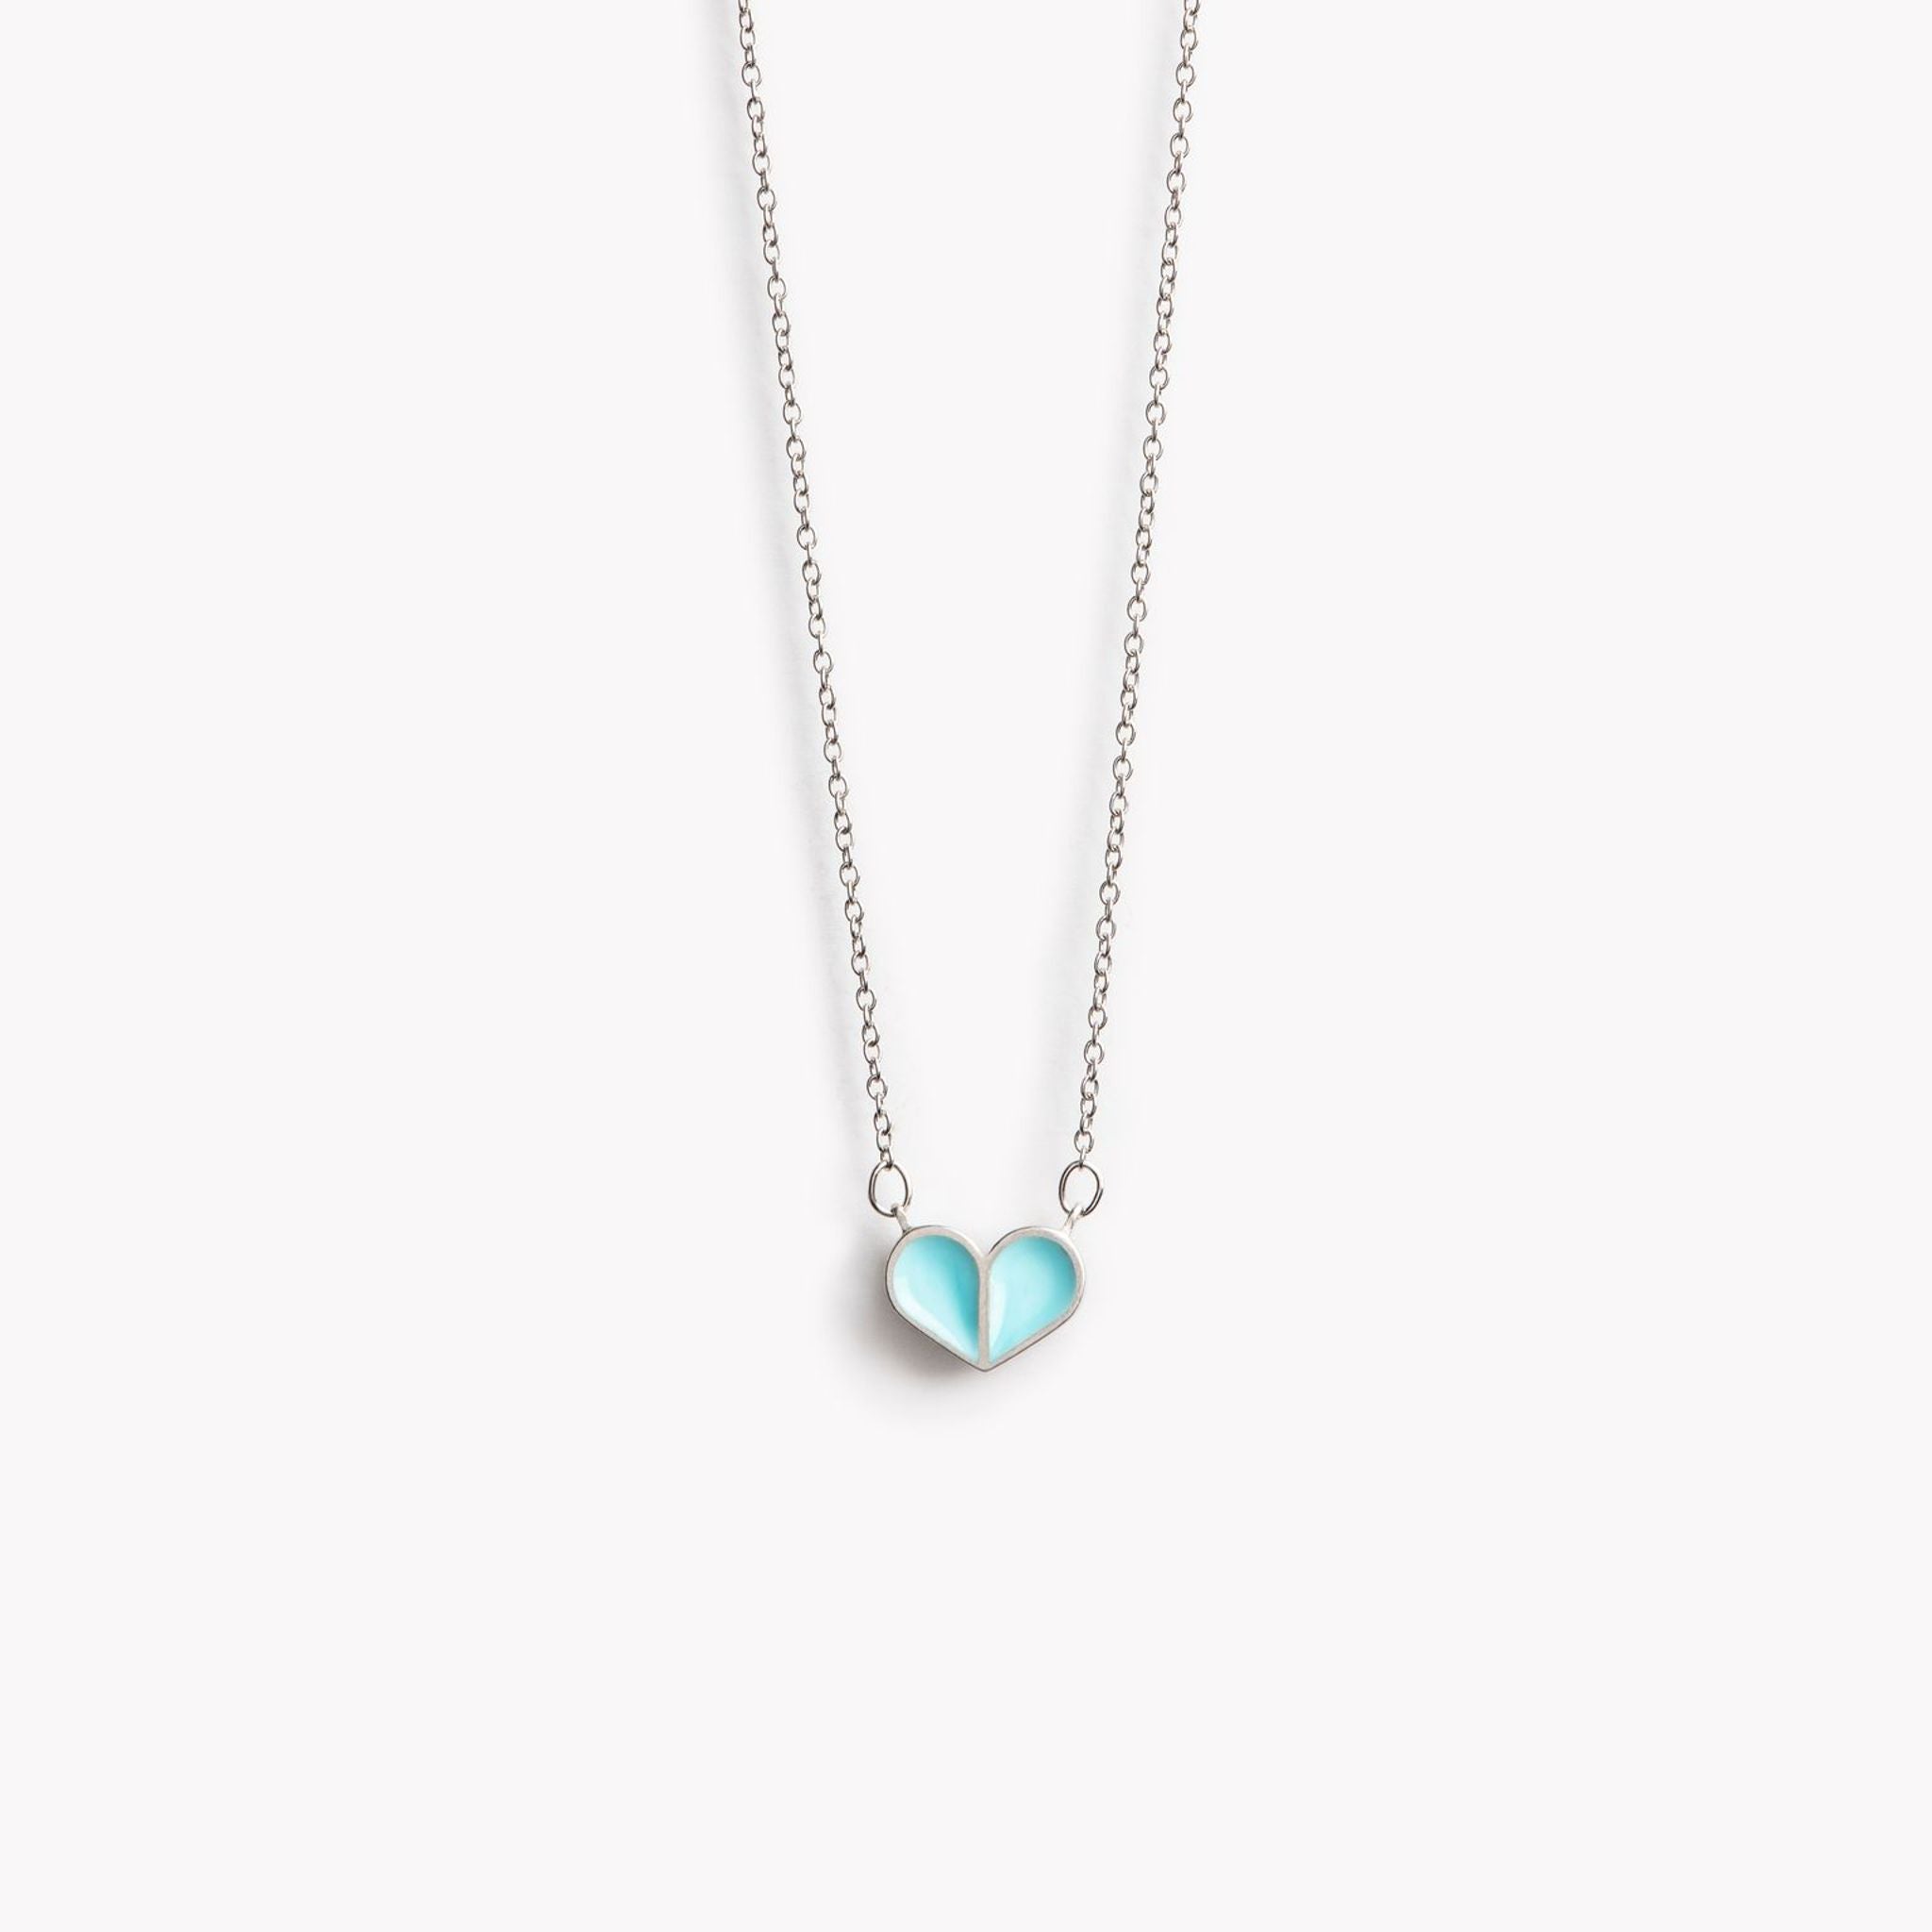 A simple pewter heart shaped pendant necklace in turquoise.